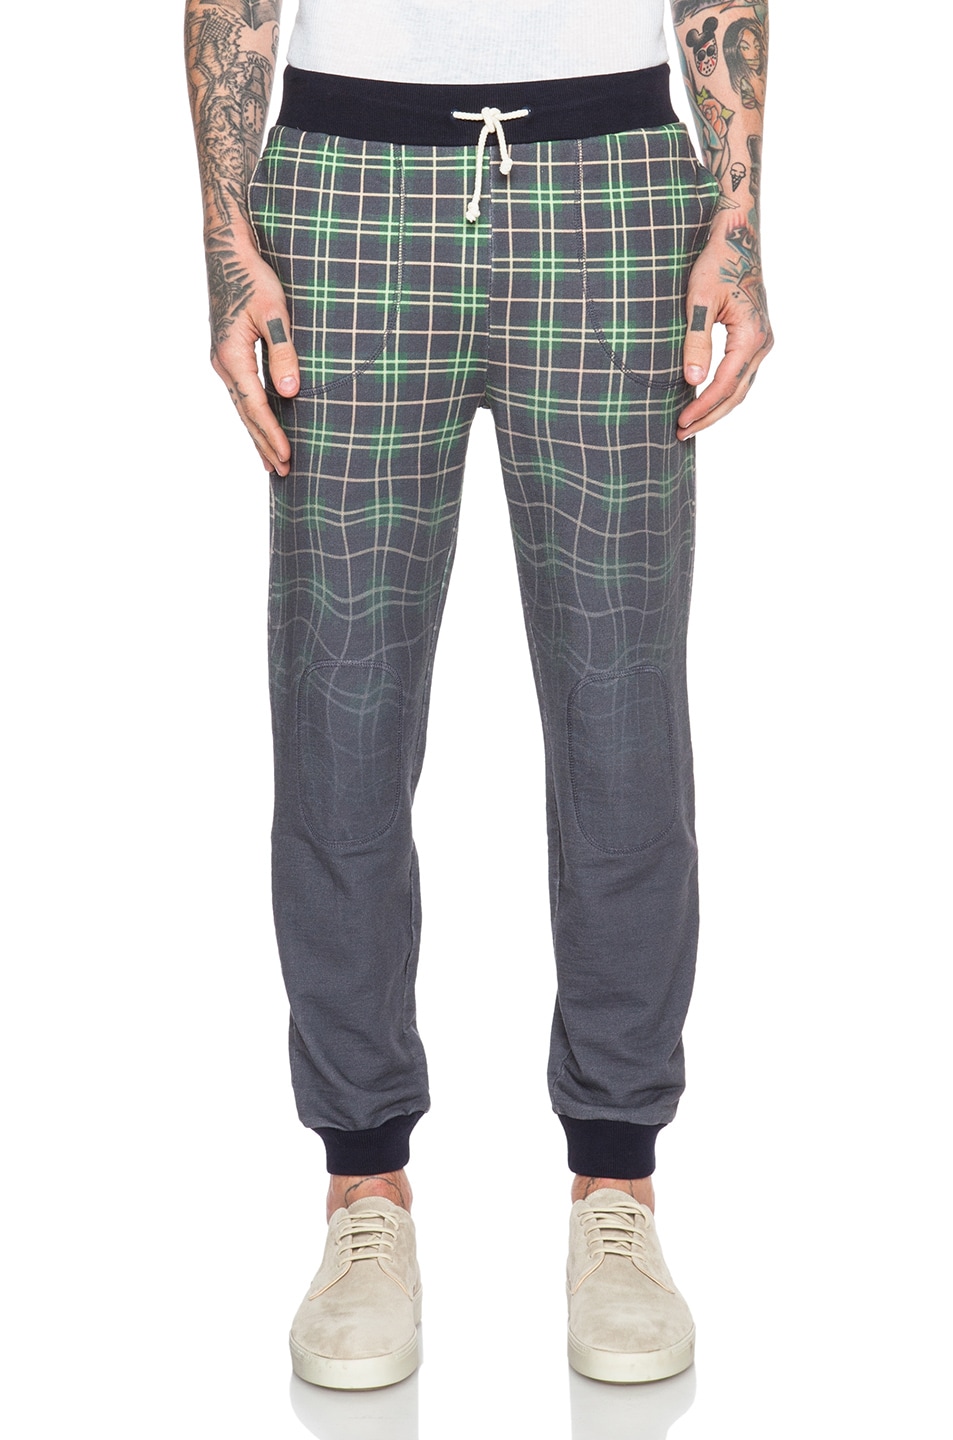 Image 1 of Band of Outsiders Melting Plaid Sweatpants in Multicolor